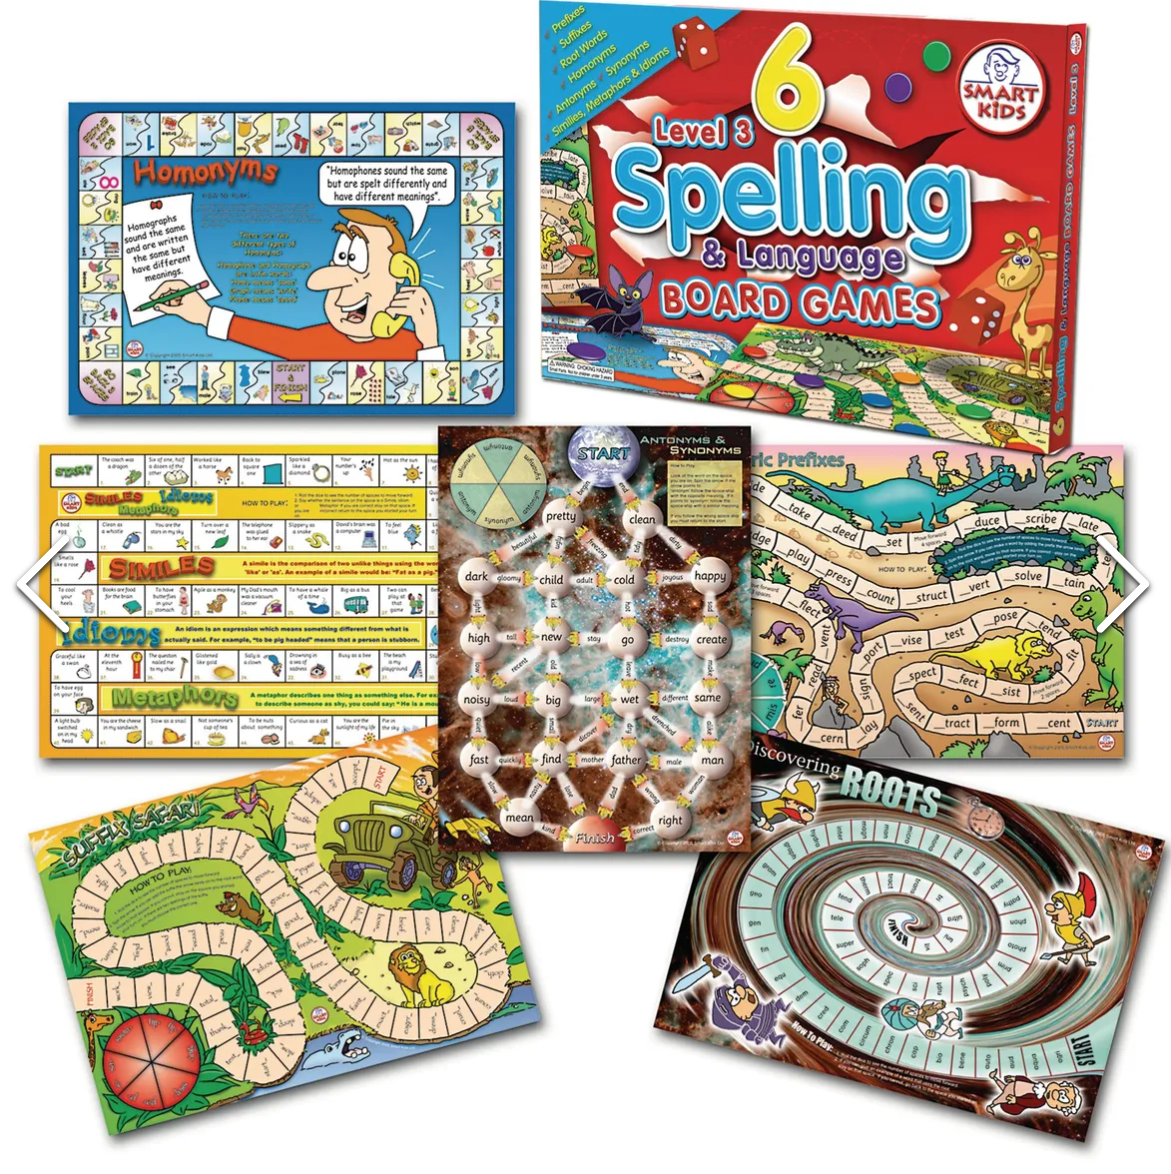 6 Spelling and Language Board Games Level 3